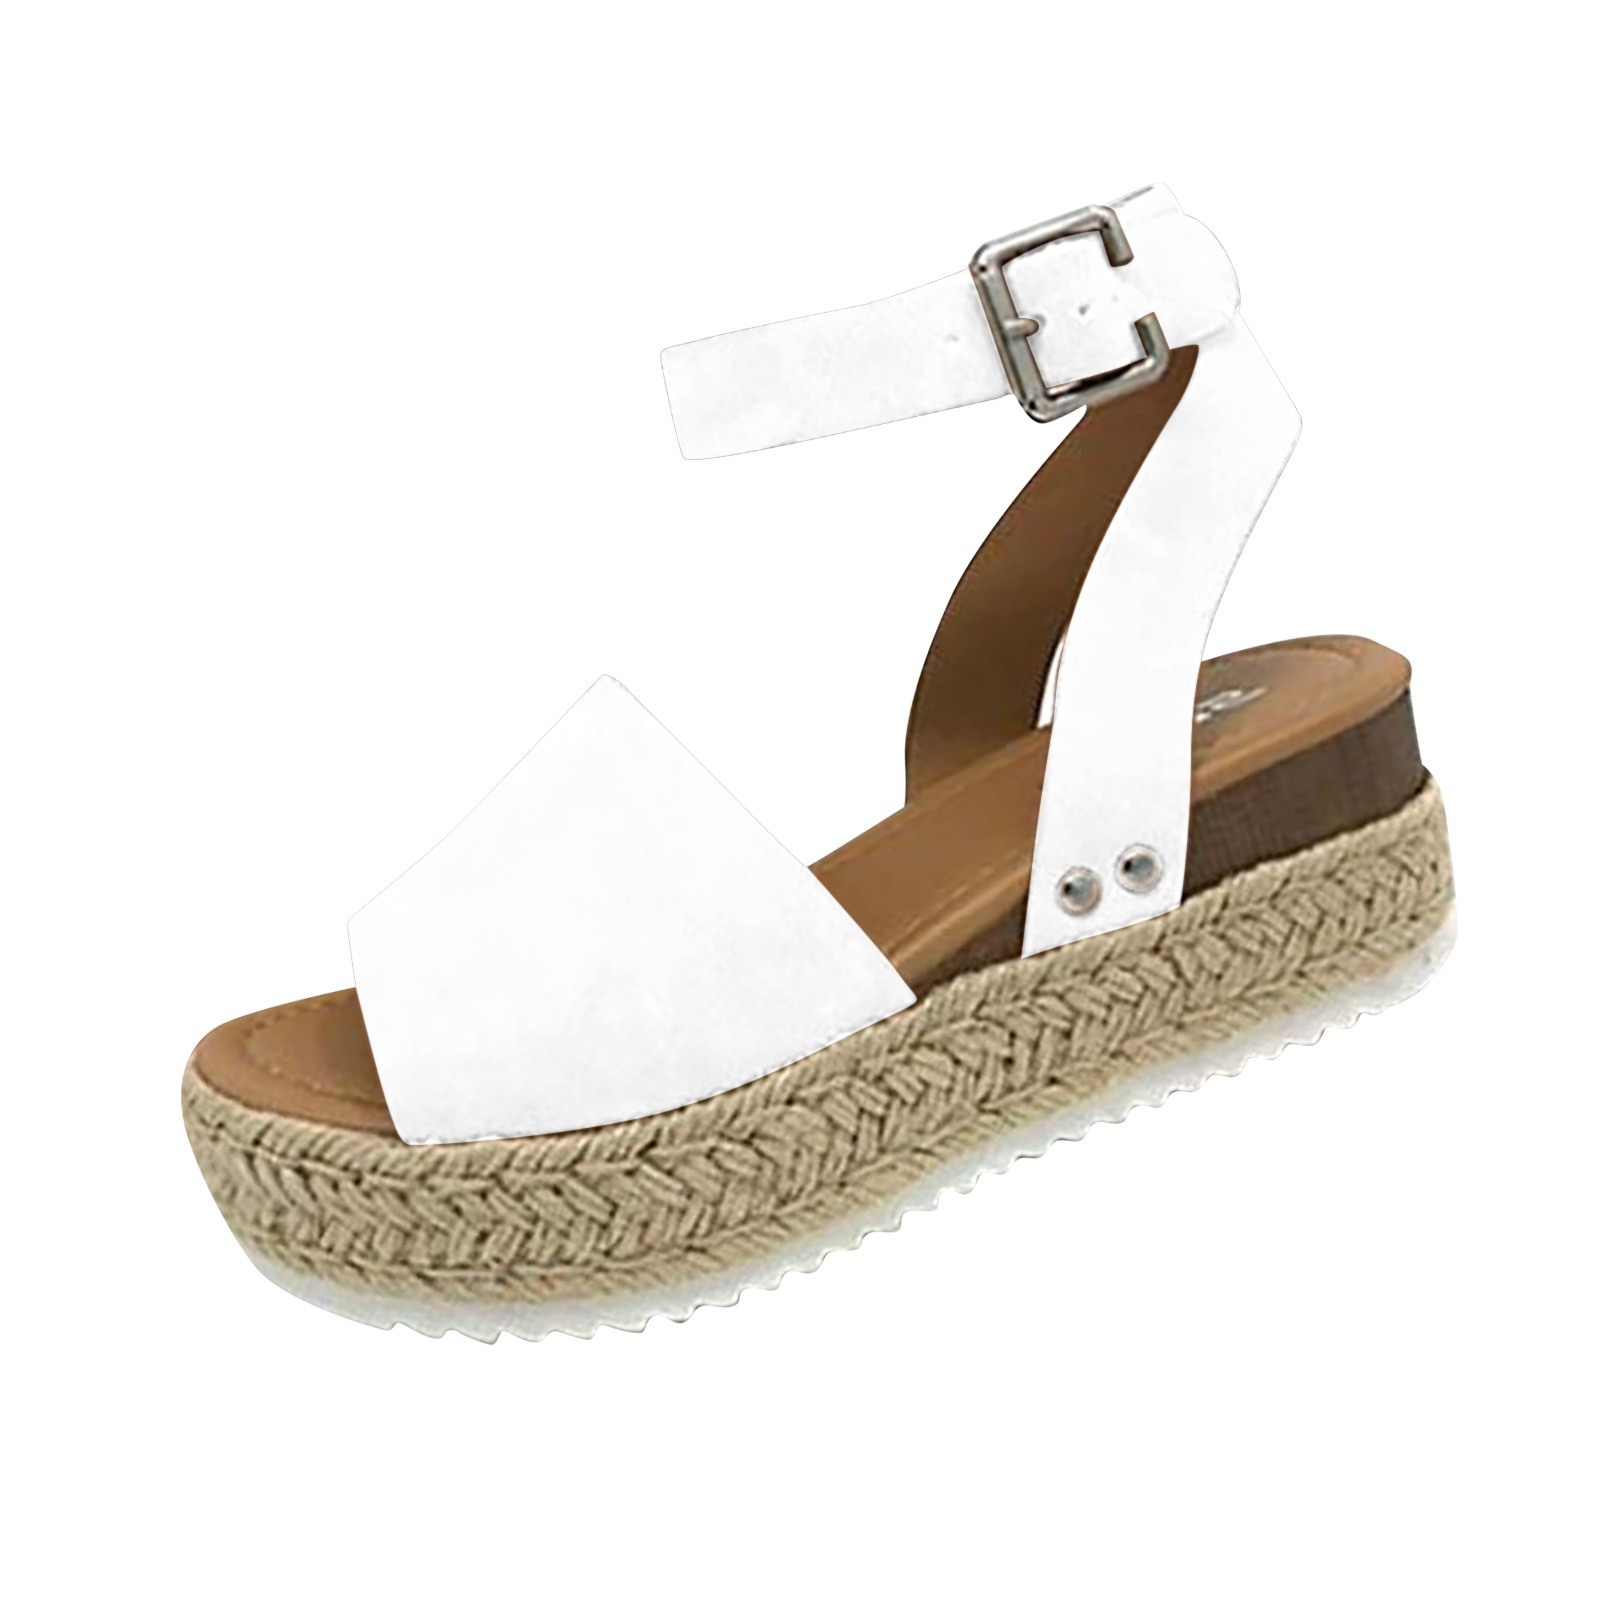 Azrian Woman Summer Sandals Open toe Casual Platform Wedge Shoes Casual Canvas Shoes - image 2 of 3